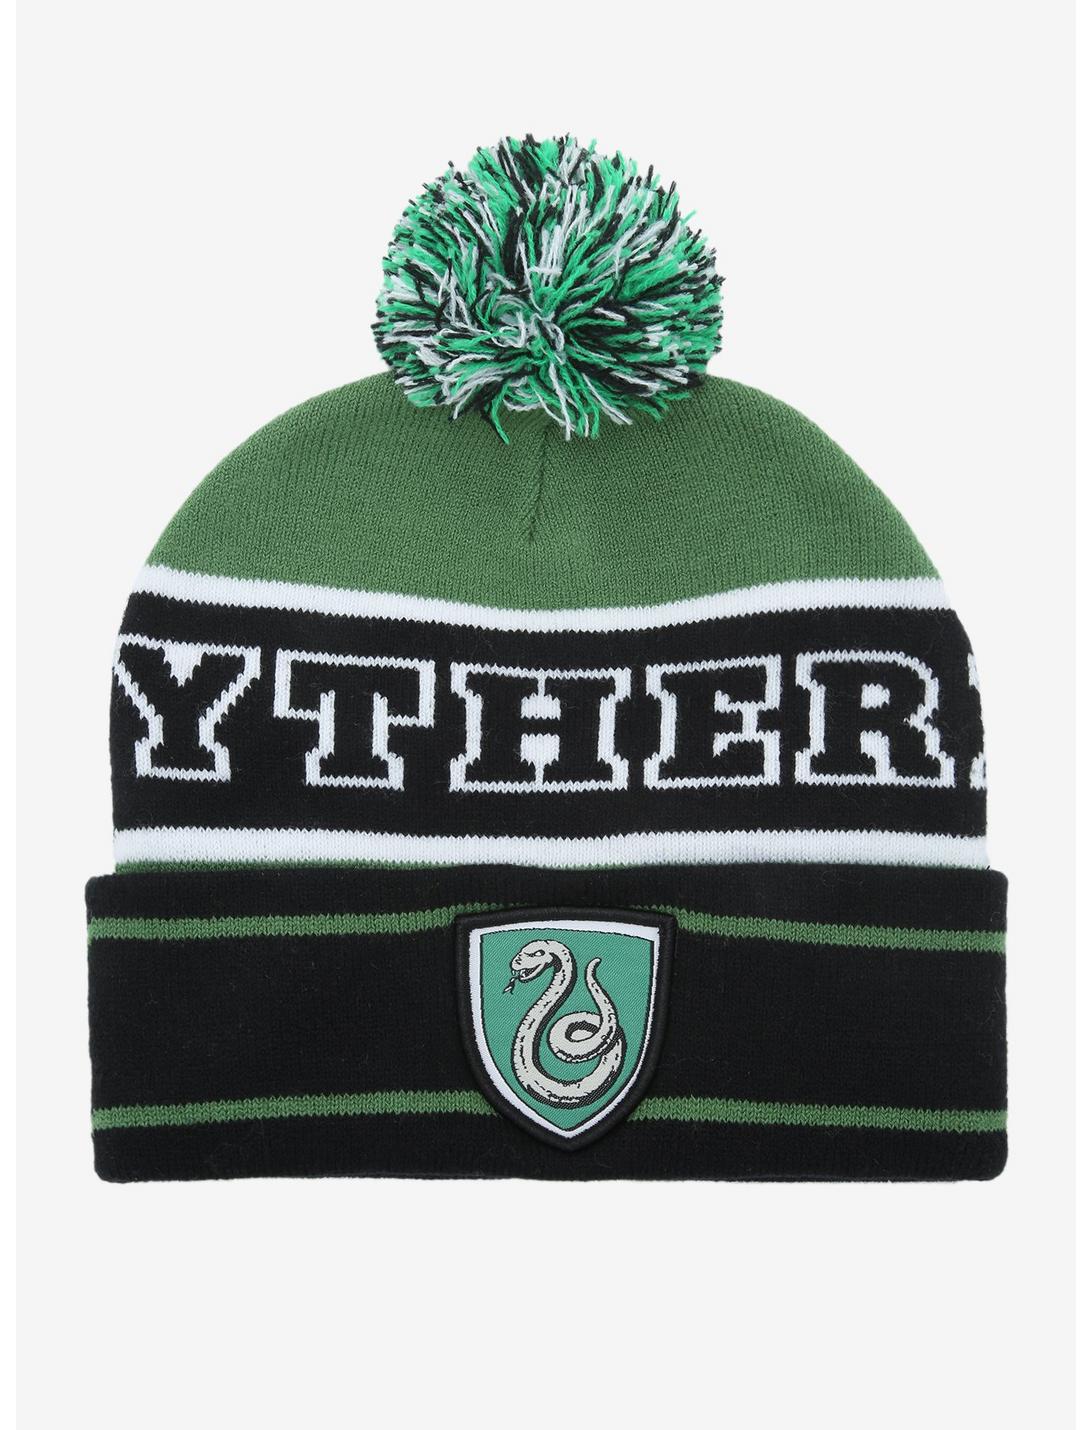 HARRY POTTER Slytherin House Beanie Cap HAT w/ CREST LICENSED Green Hogwarts USA 